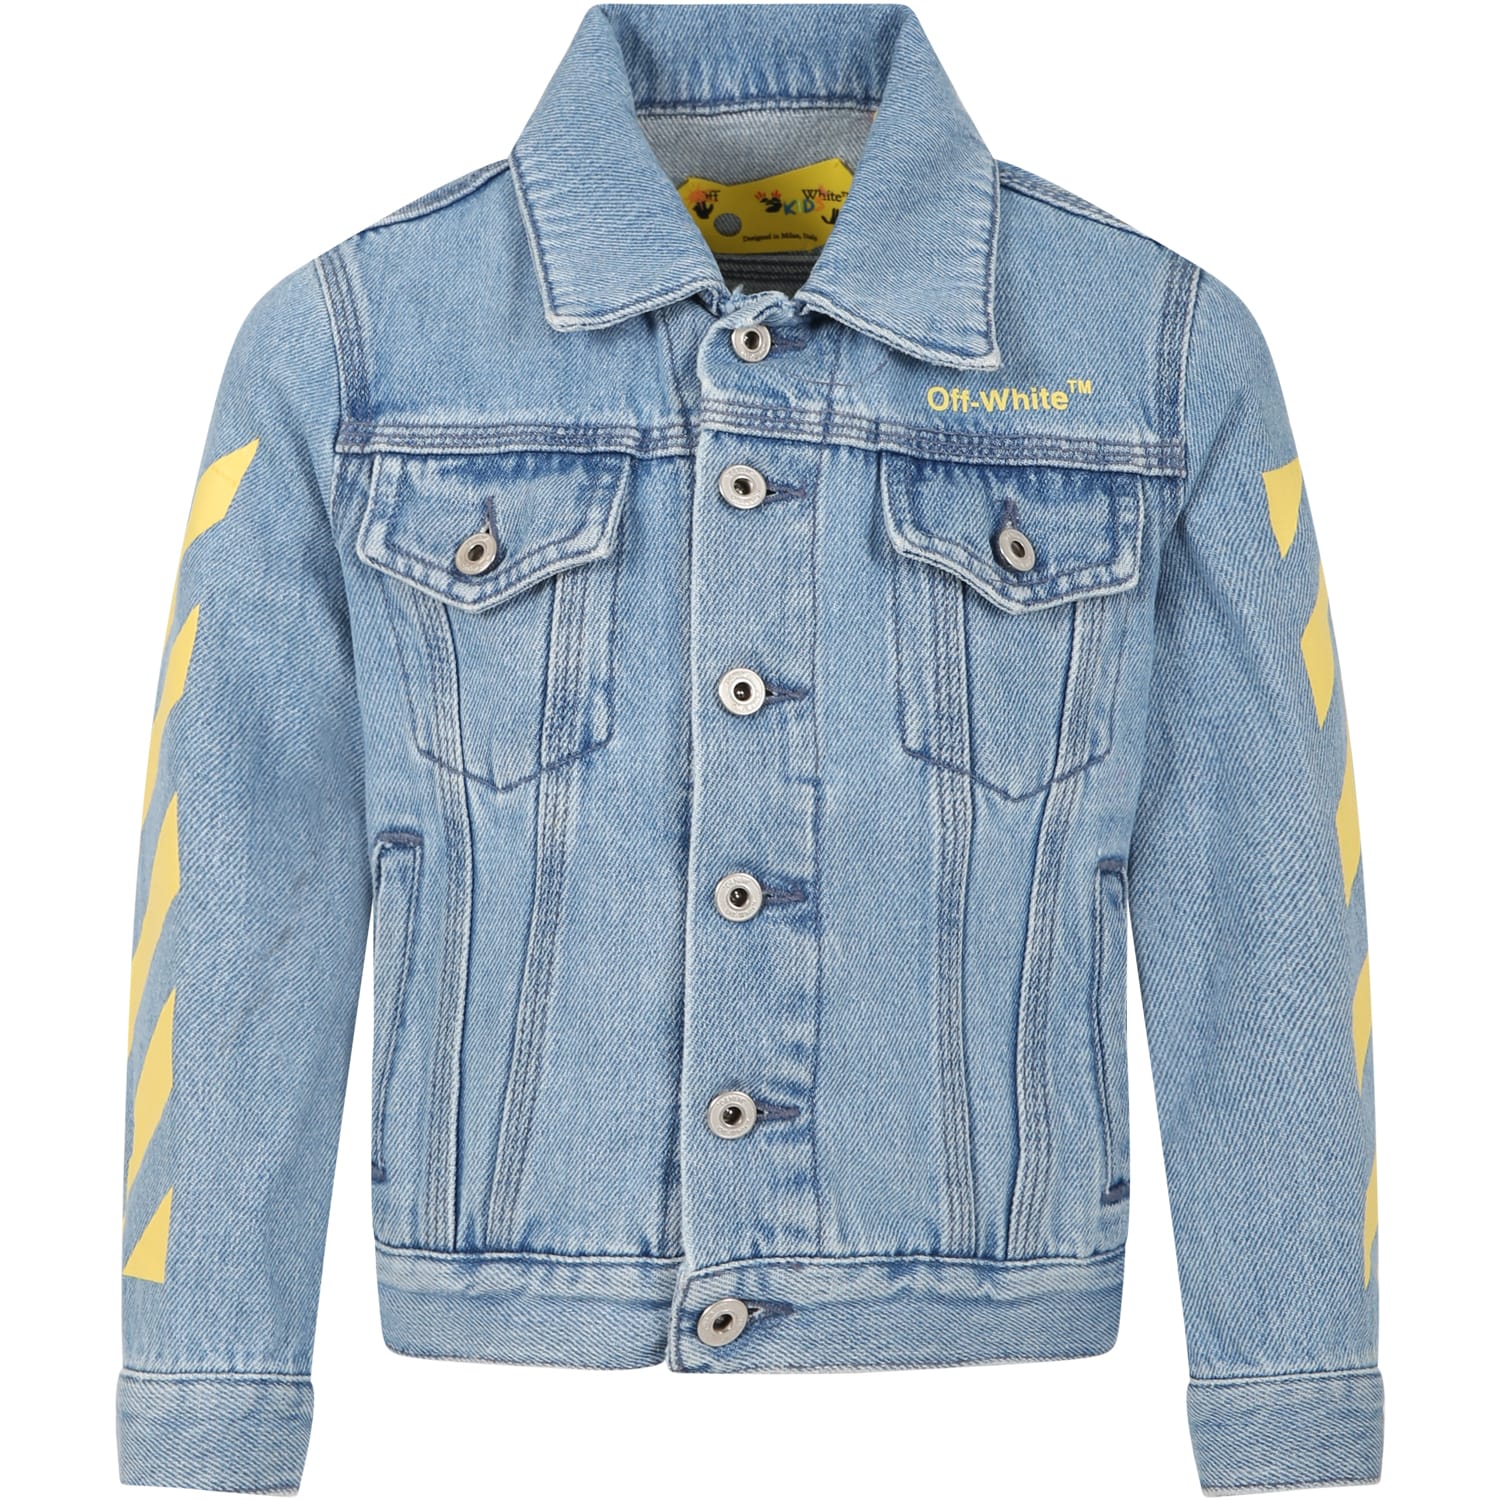 OFF-WHITE LIGHT BLUE JACKET FOR KIDS WITH ICONIC ARROWS AND LOGO